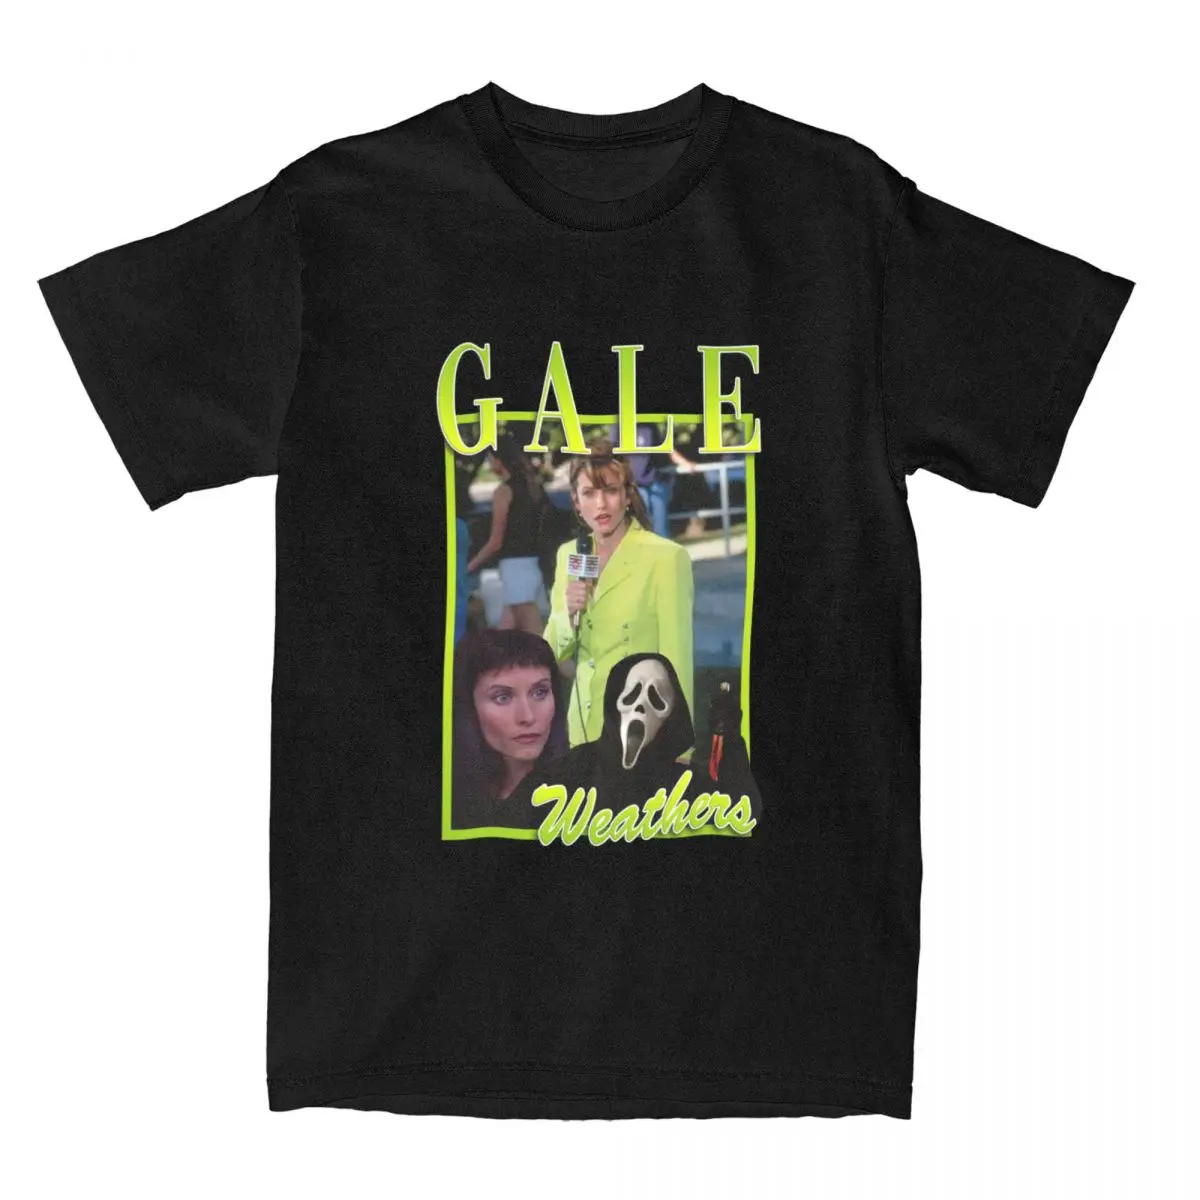 Gale Weathers Scream Lime Green Tribute Men T Shirt Courtney Cox Sidney Sydney Novelty Tees T-Shirts Cotton 4XL 5XL 6XL Clothes